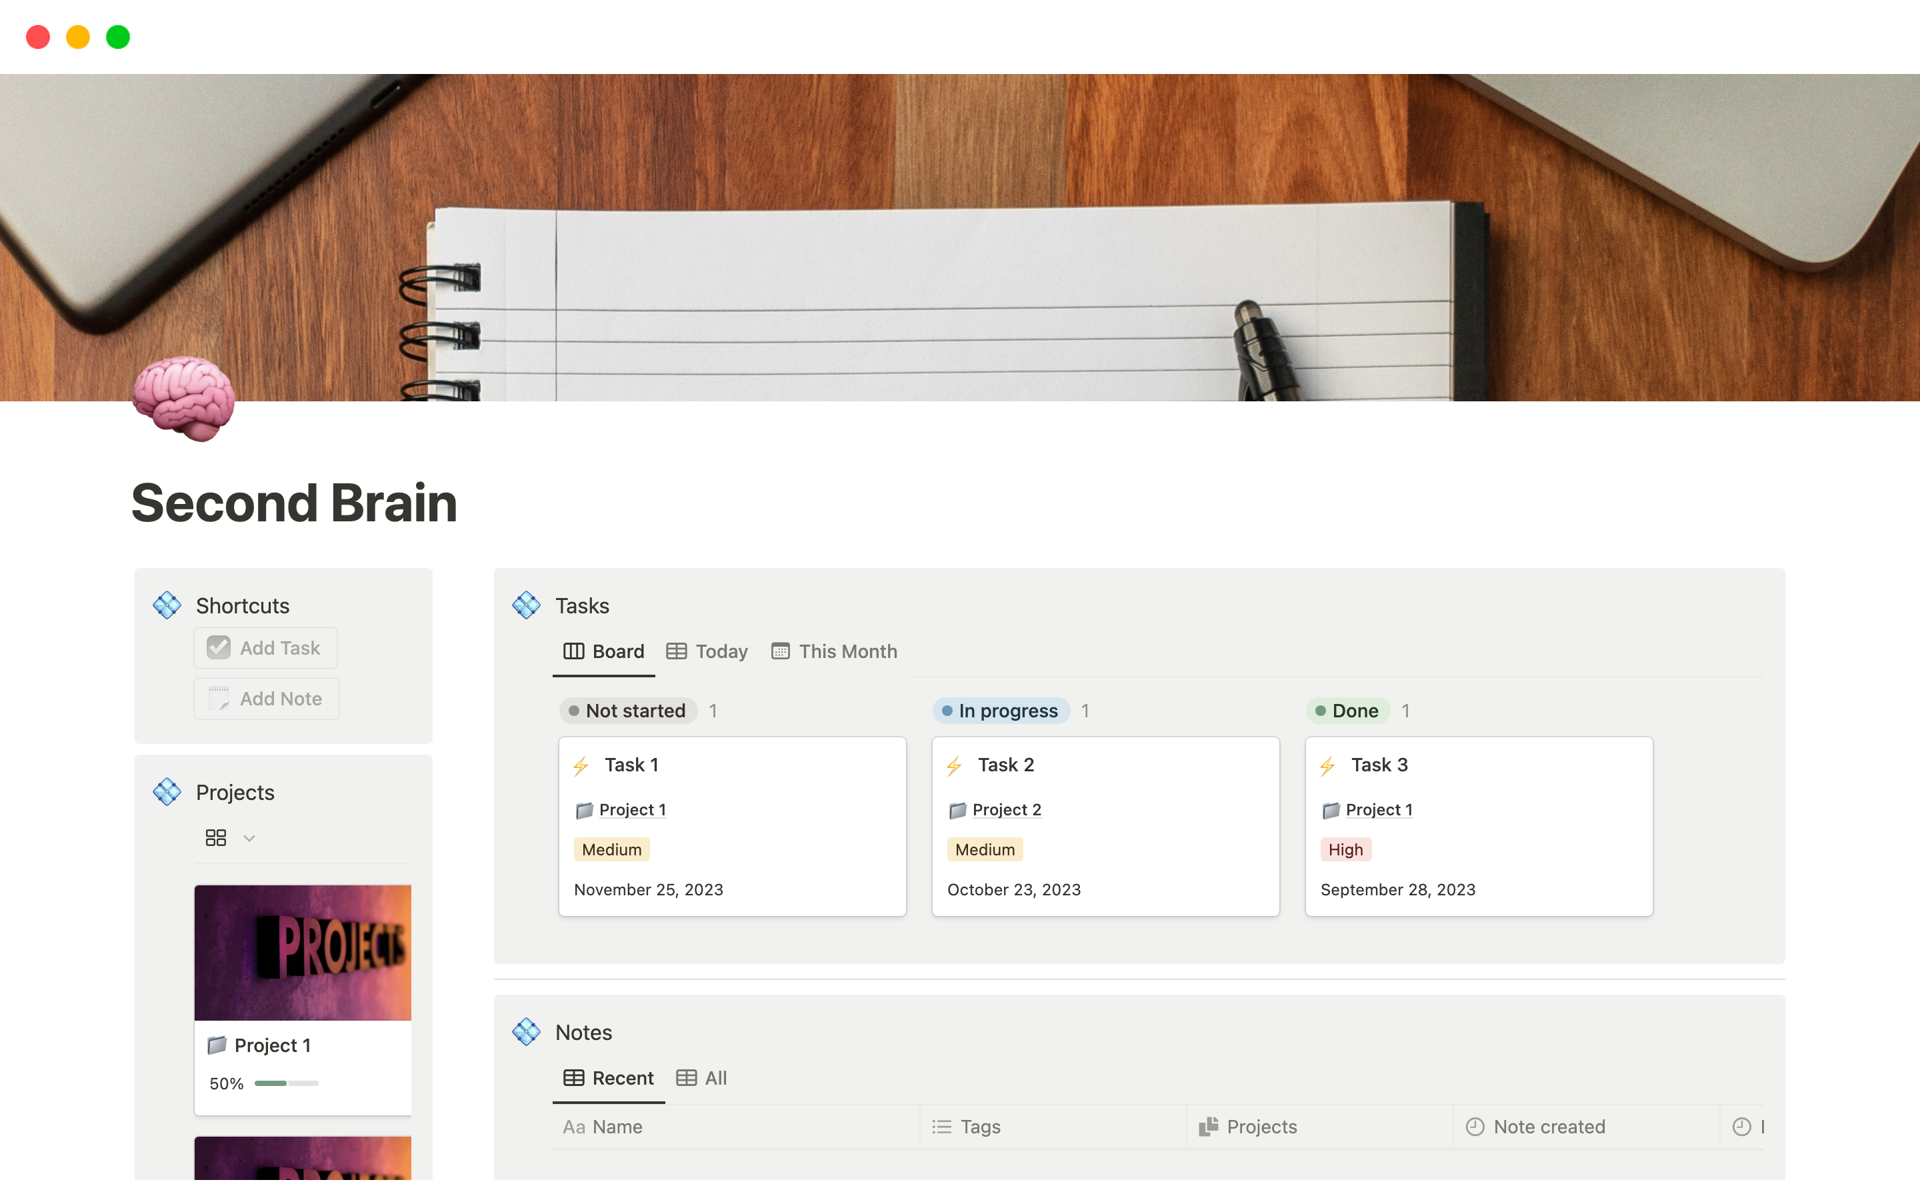 Effortlessly manage tasks, notes, and projects with the Second Brain Notion template, designed for clarity and efficient progression tracking.